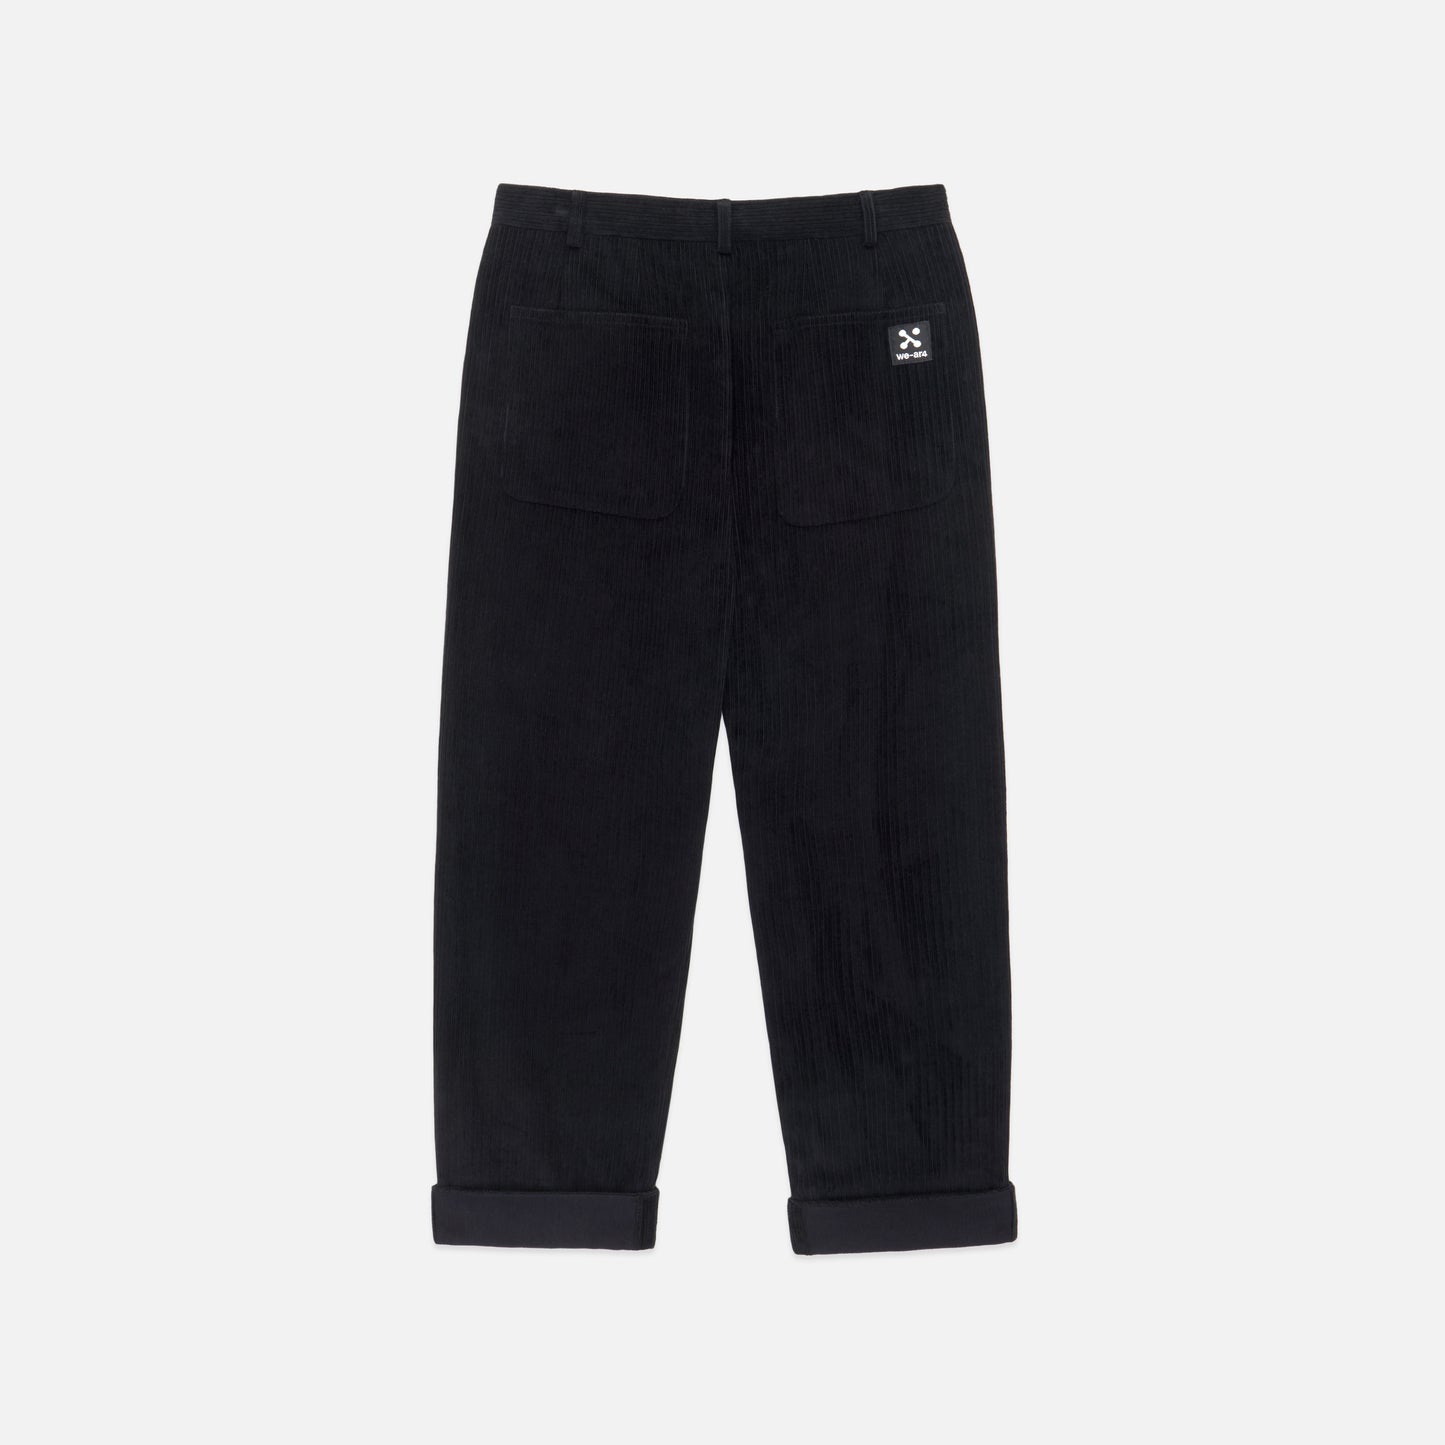 Relaxed Corduroy Pant